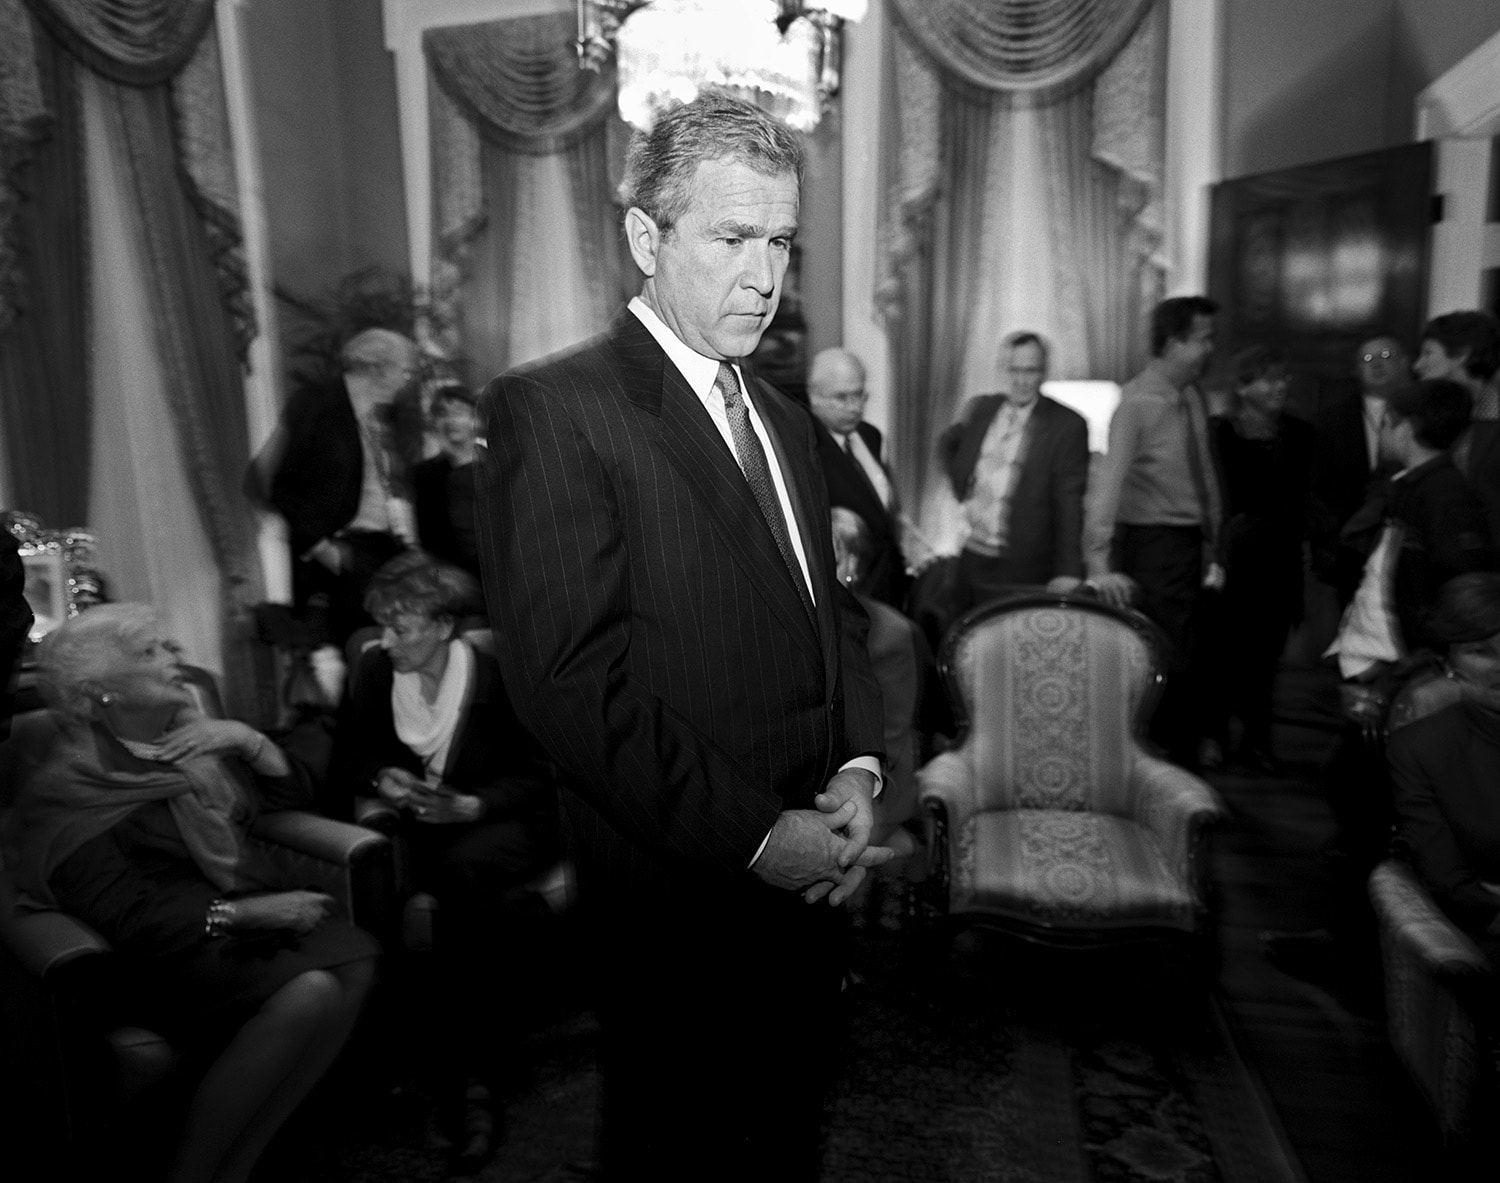 Republican presidential candidate George W. Bush watches the television right after his opponent Vice President Al Gore took back his concession in the wee hours of the next day after the election, Austin, Texas, November 7, 2000. The U.S. Supreme Court ultimately ruled that Bush won.